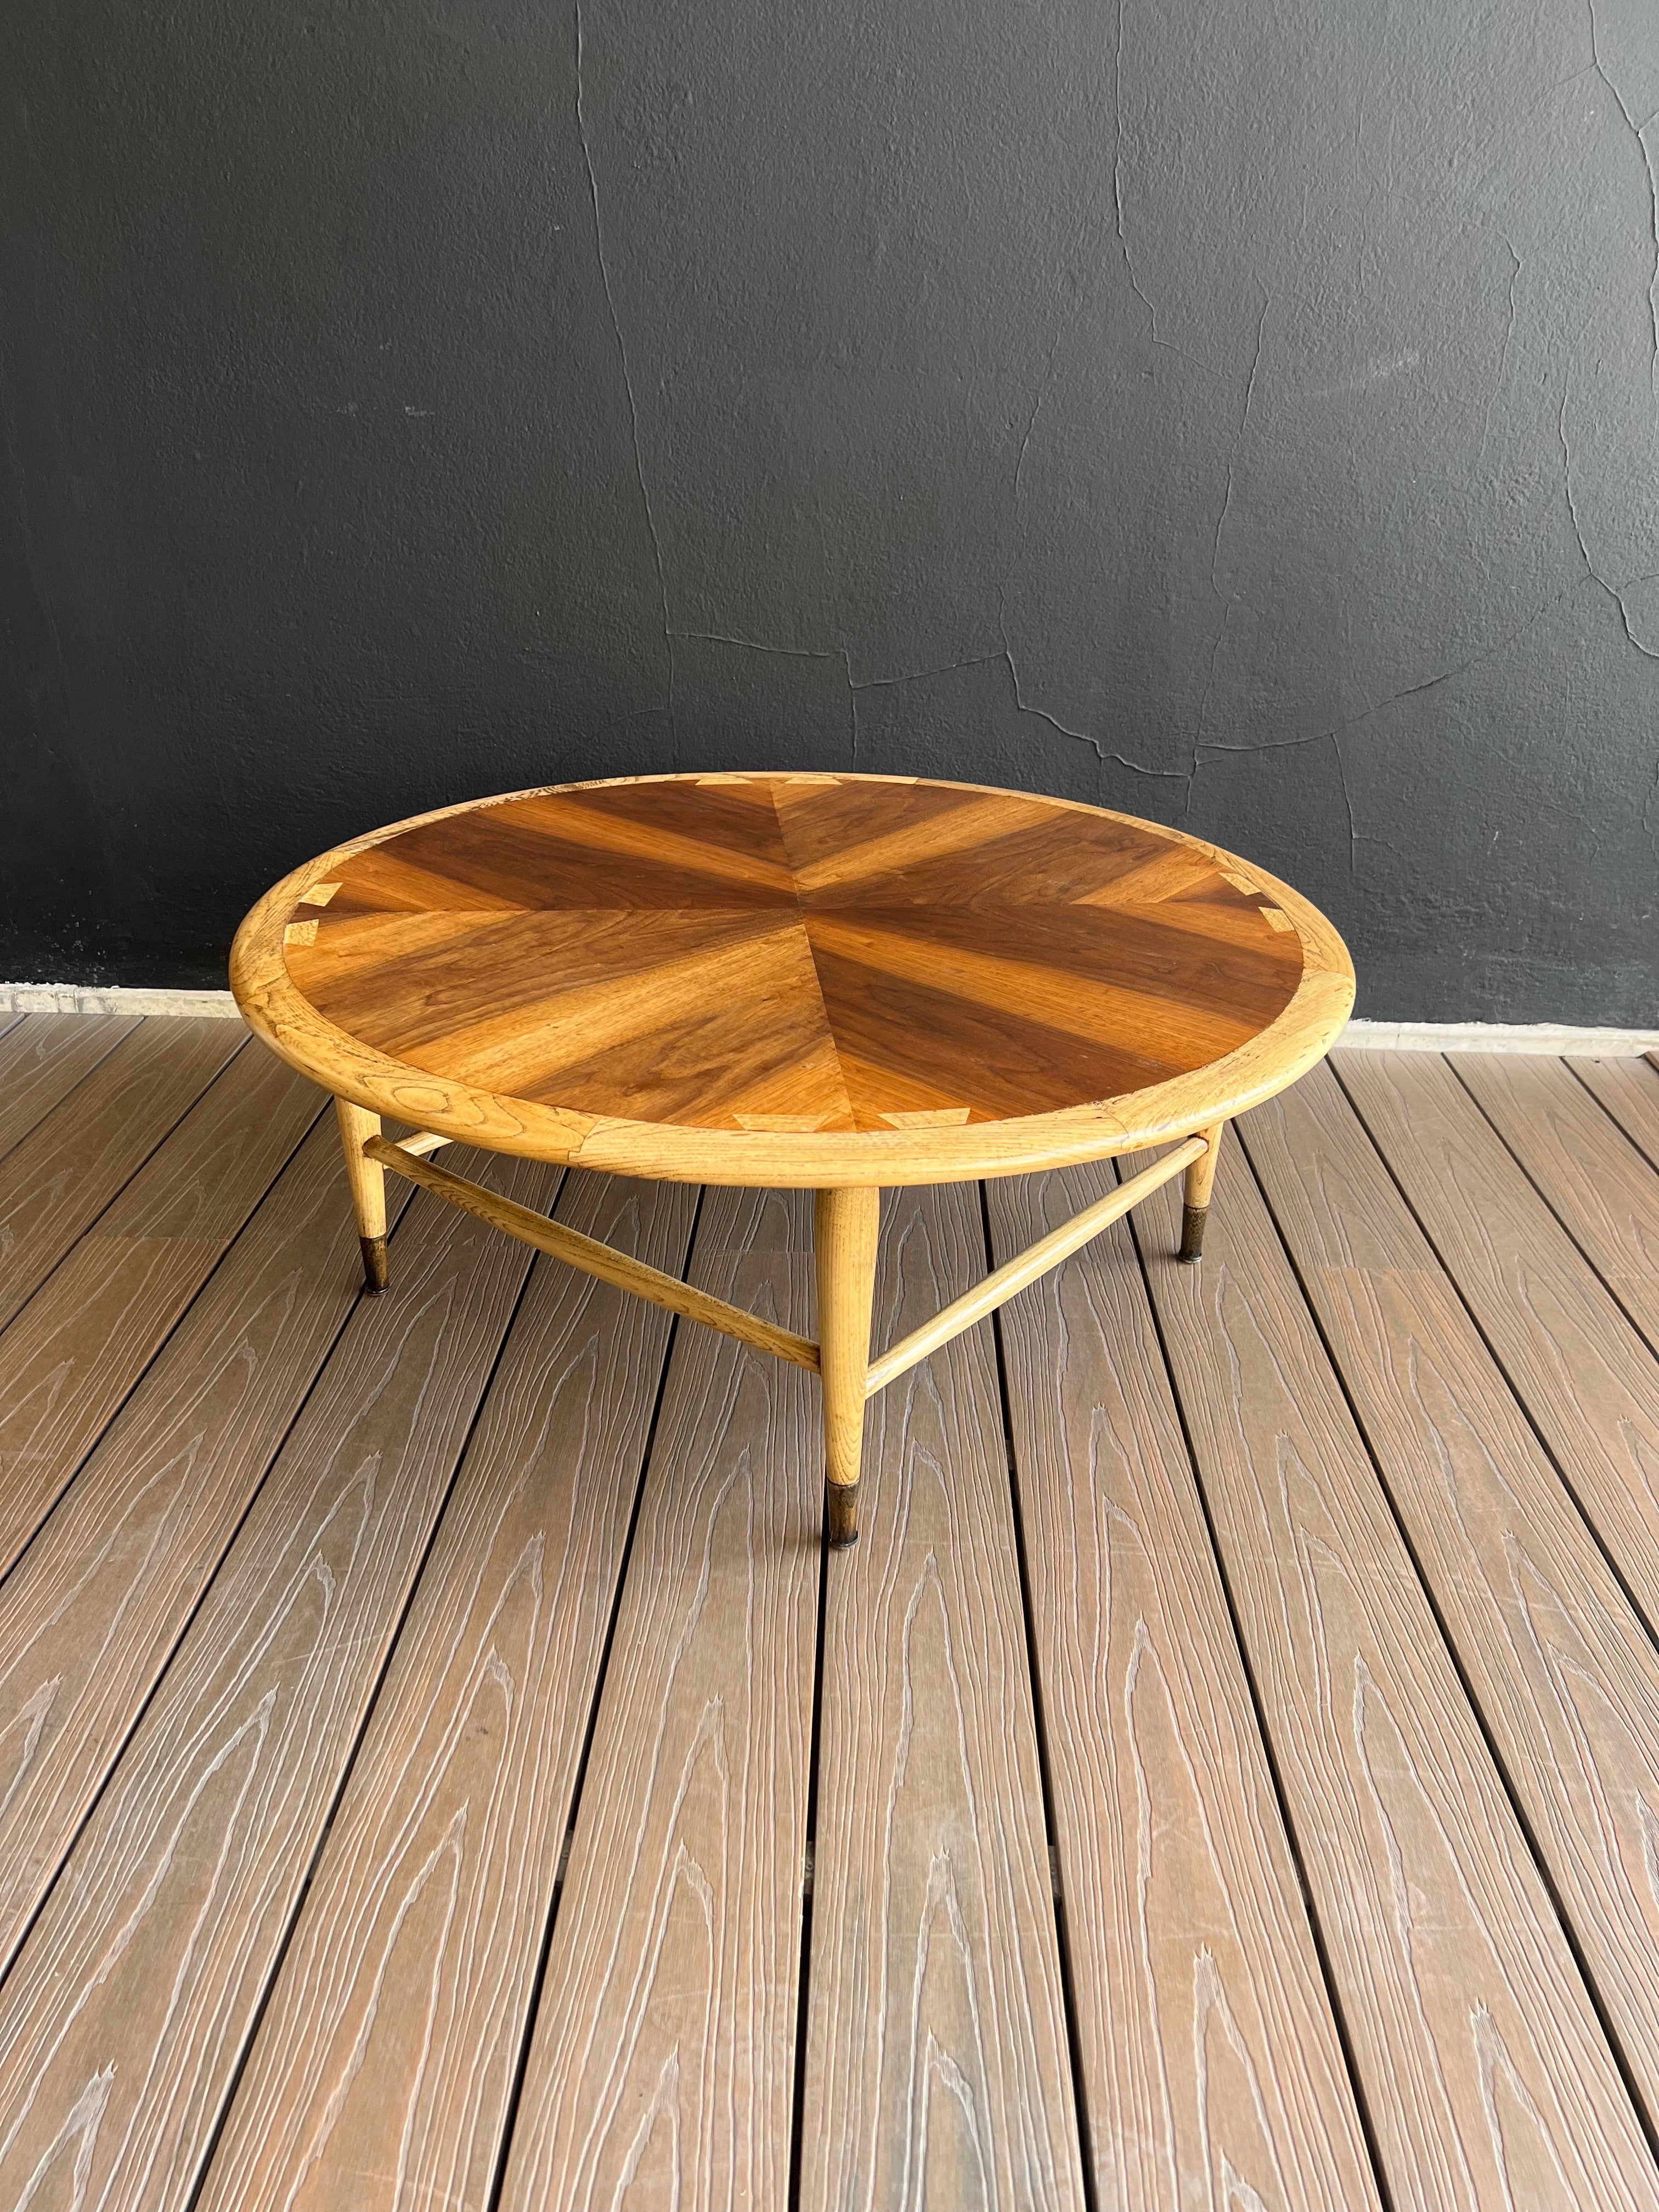 Classic mid-century modern Lane Acclaim round walnut and oak dovetail coffee table, professionally restored by our master craftsmen in our workshop, it has minimal details that time marked but that give that character and essence to our vintage